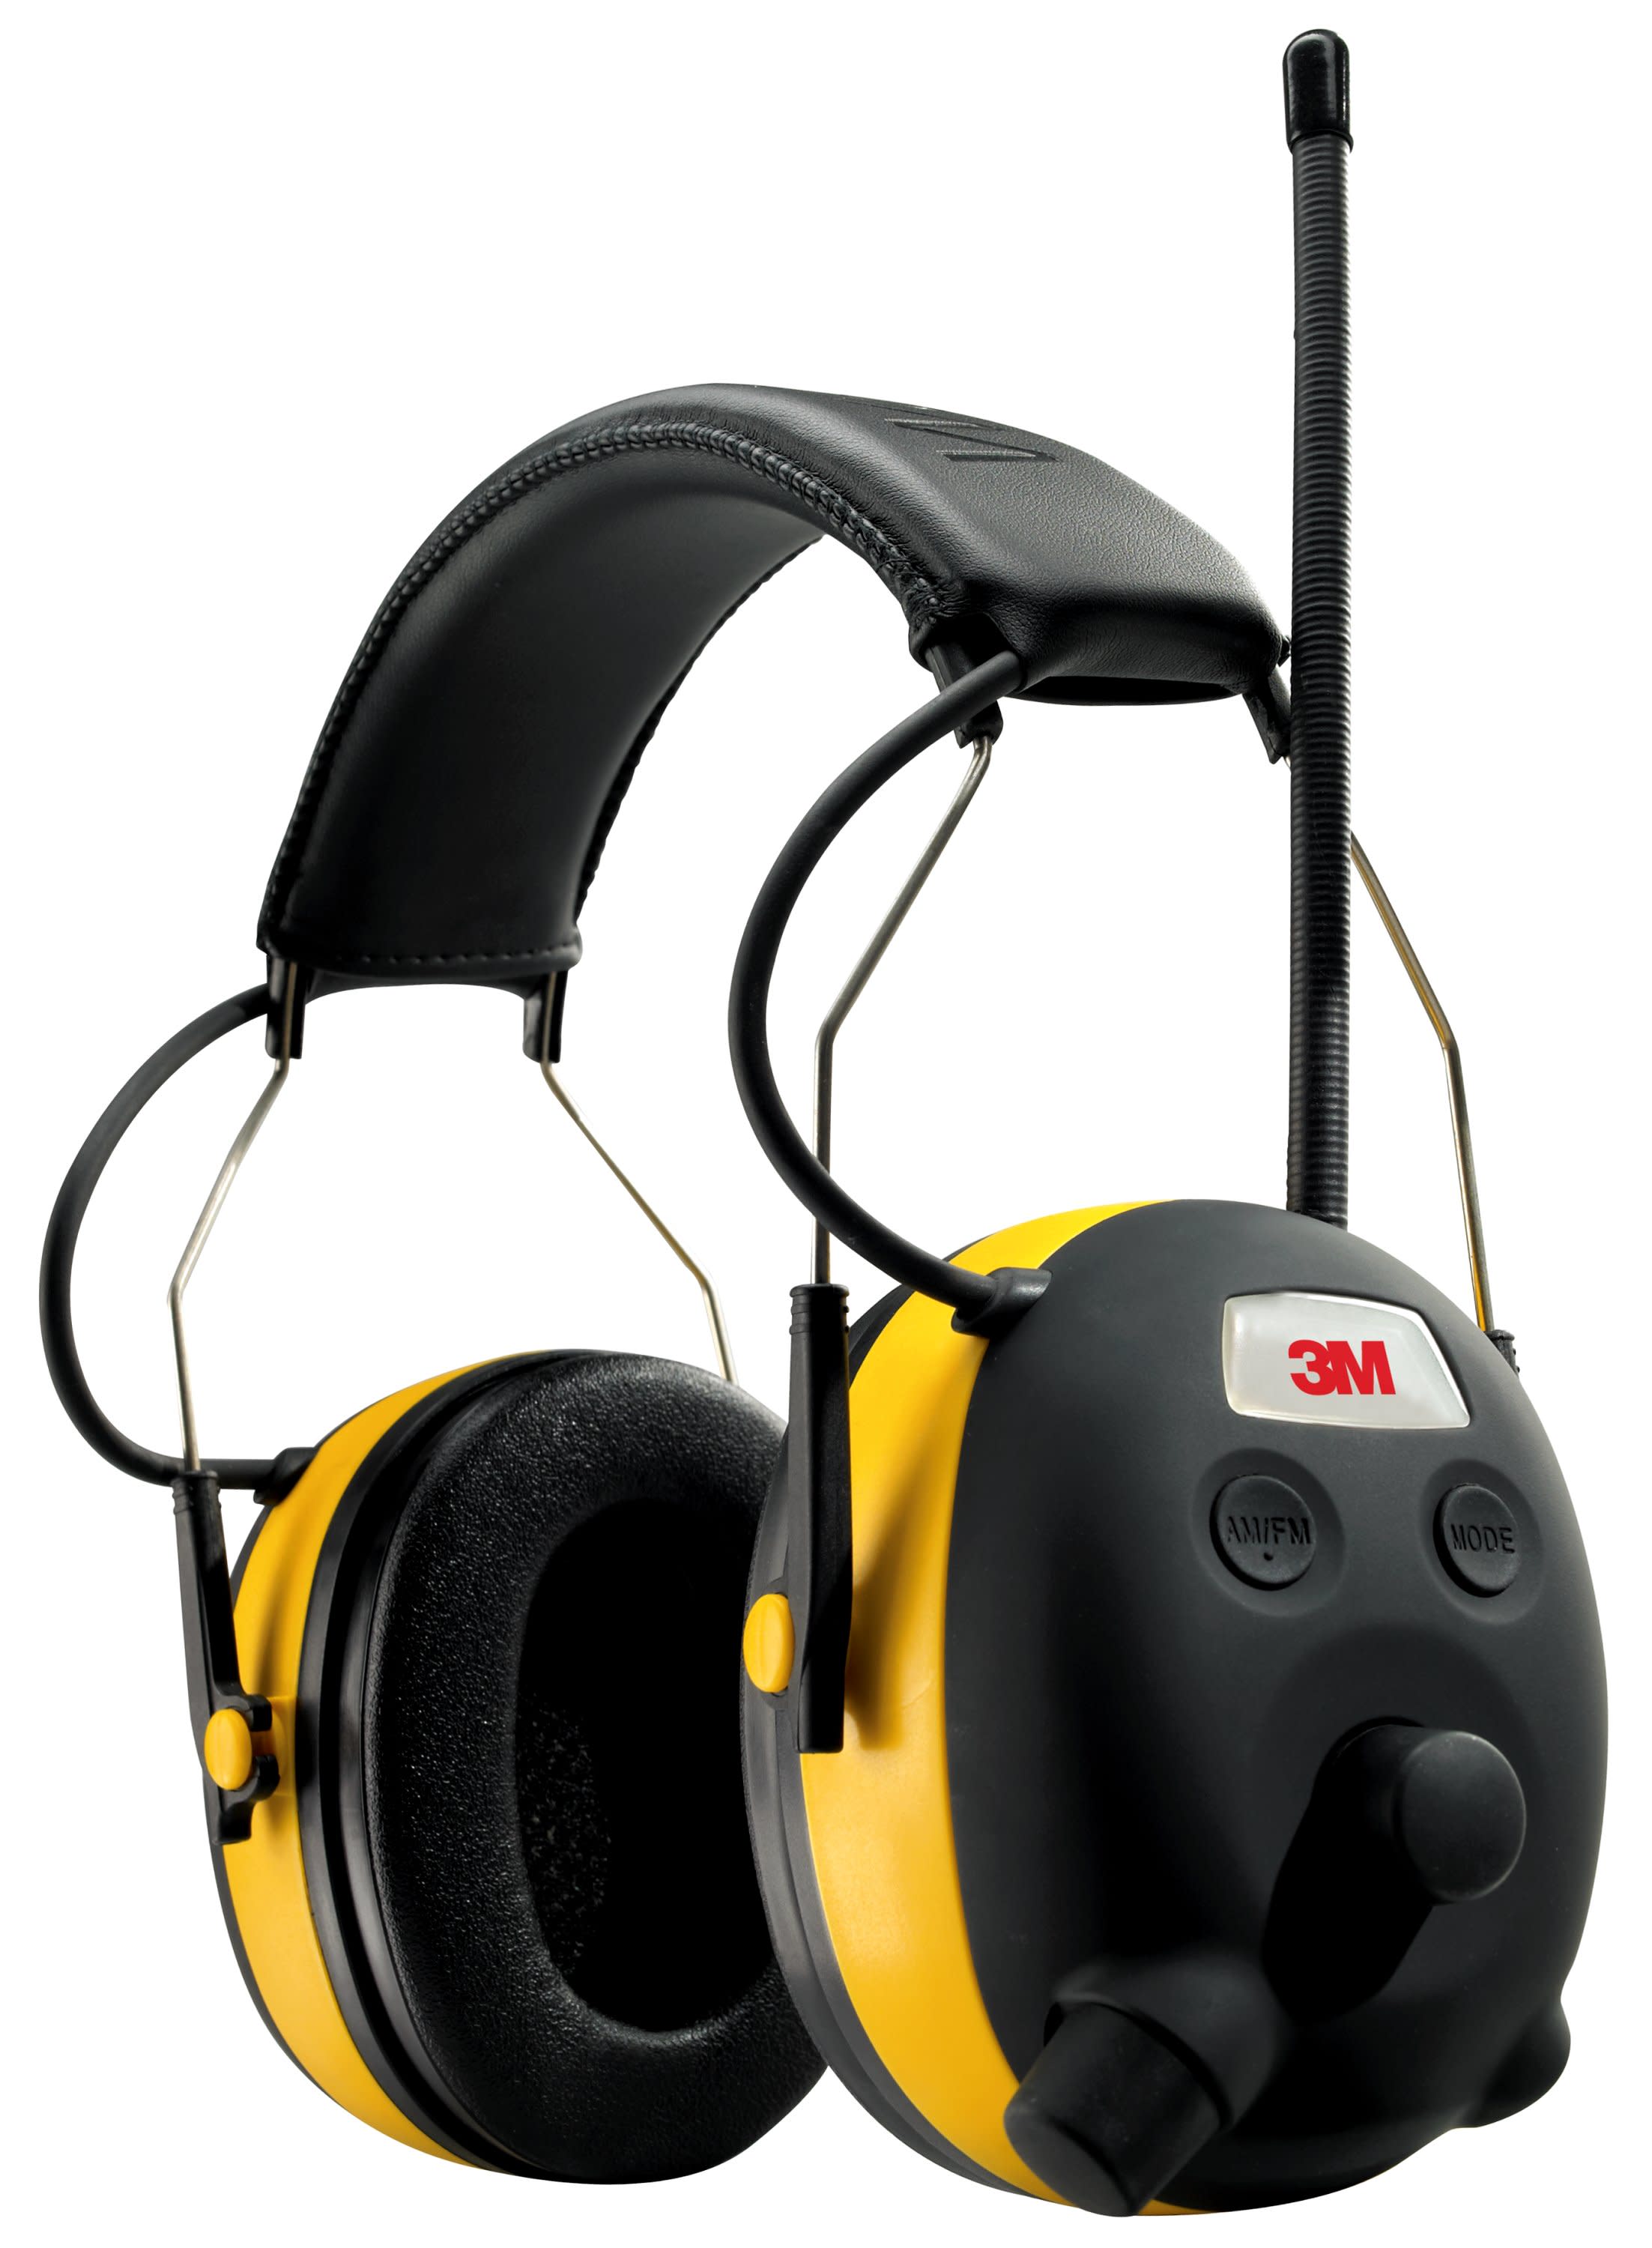 3M WorkTunes Hearing Protector with AM/FM Digital Radio - image 4 of 18